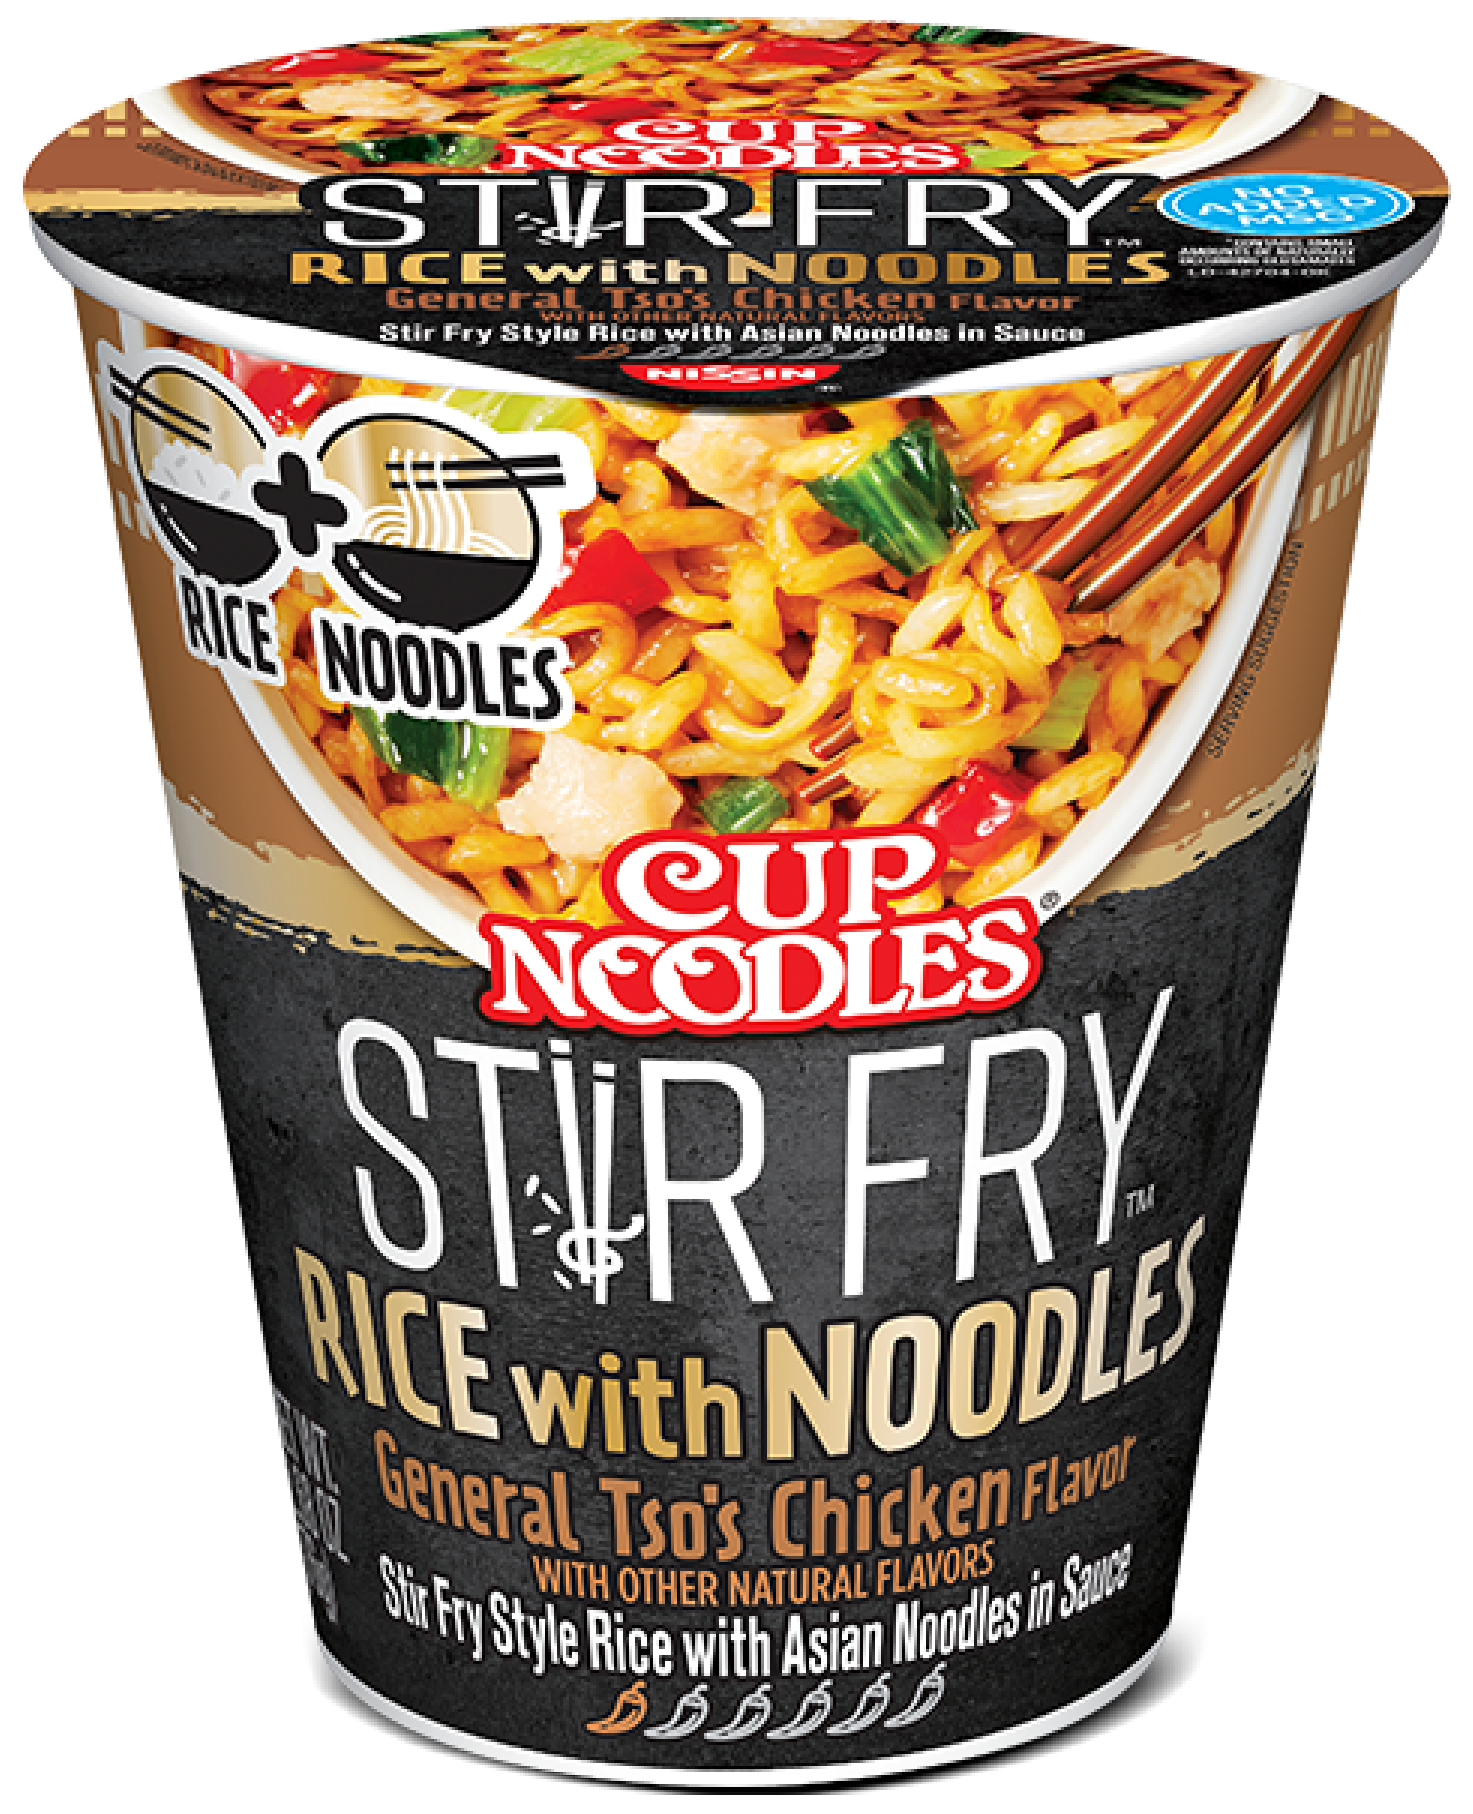 Cup Noodles Stir Fry Rice with Noodles General Tso’s Chicken